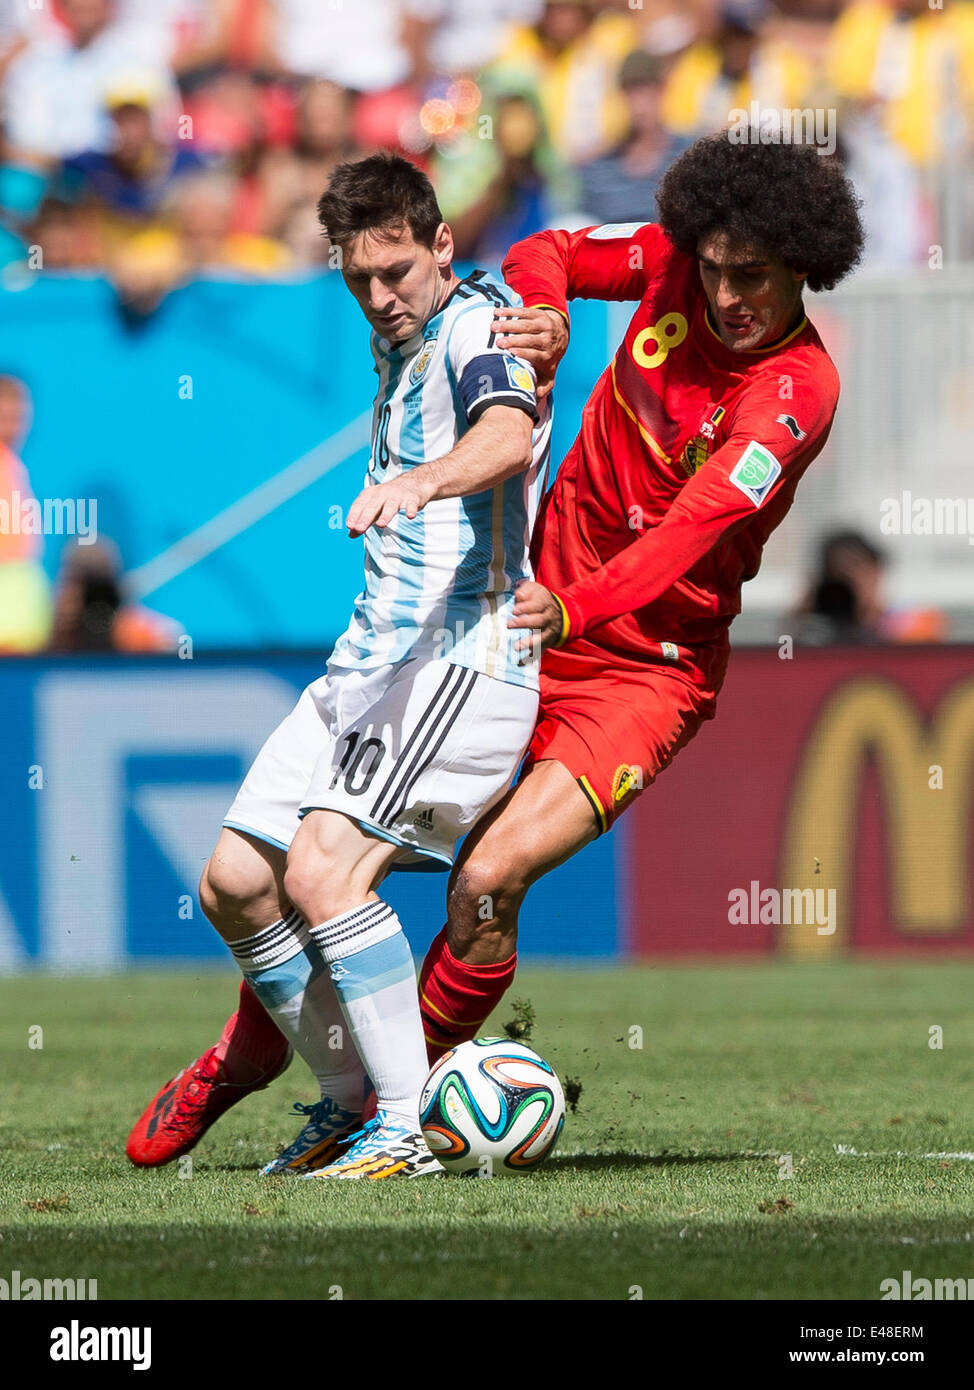 Brasilia, Brazil. 5th July, 2014. Argentina's Lionel Messi (L) vies with Belgium's Marouane Fellaini during a quarter-finals match between Argentina and Belgium of 2014 FIFA World Cup at the Estadio Nacional Stadium in Brasilia, Brazil, on July 5, 2014. Argentina won 1-0 over Belgium and qualified for the semi-finals. Credit:  Qi Heng/Xinhua/Alamy Live News Stock Photo